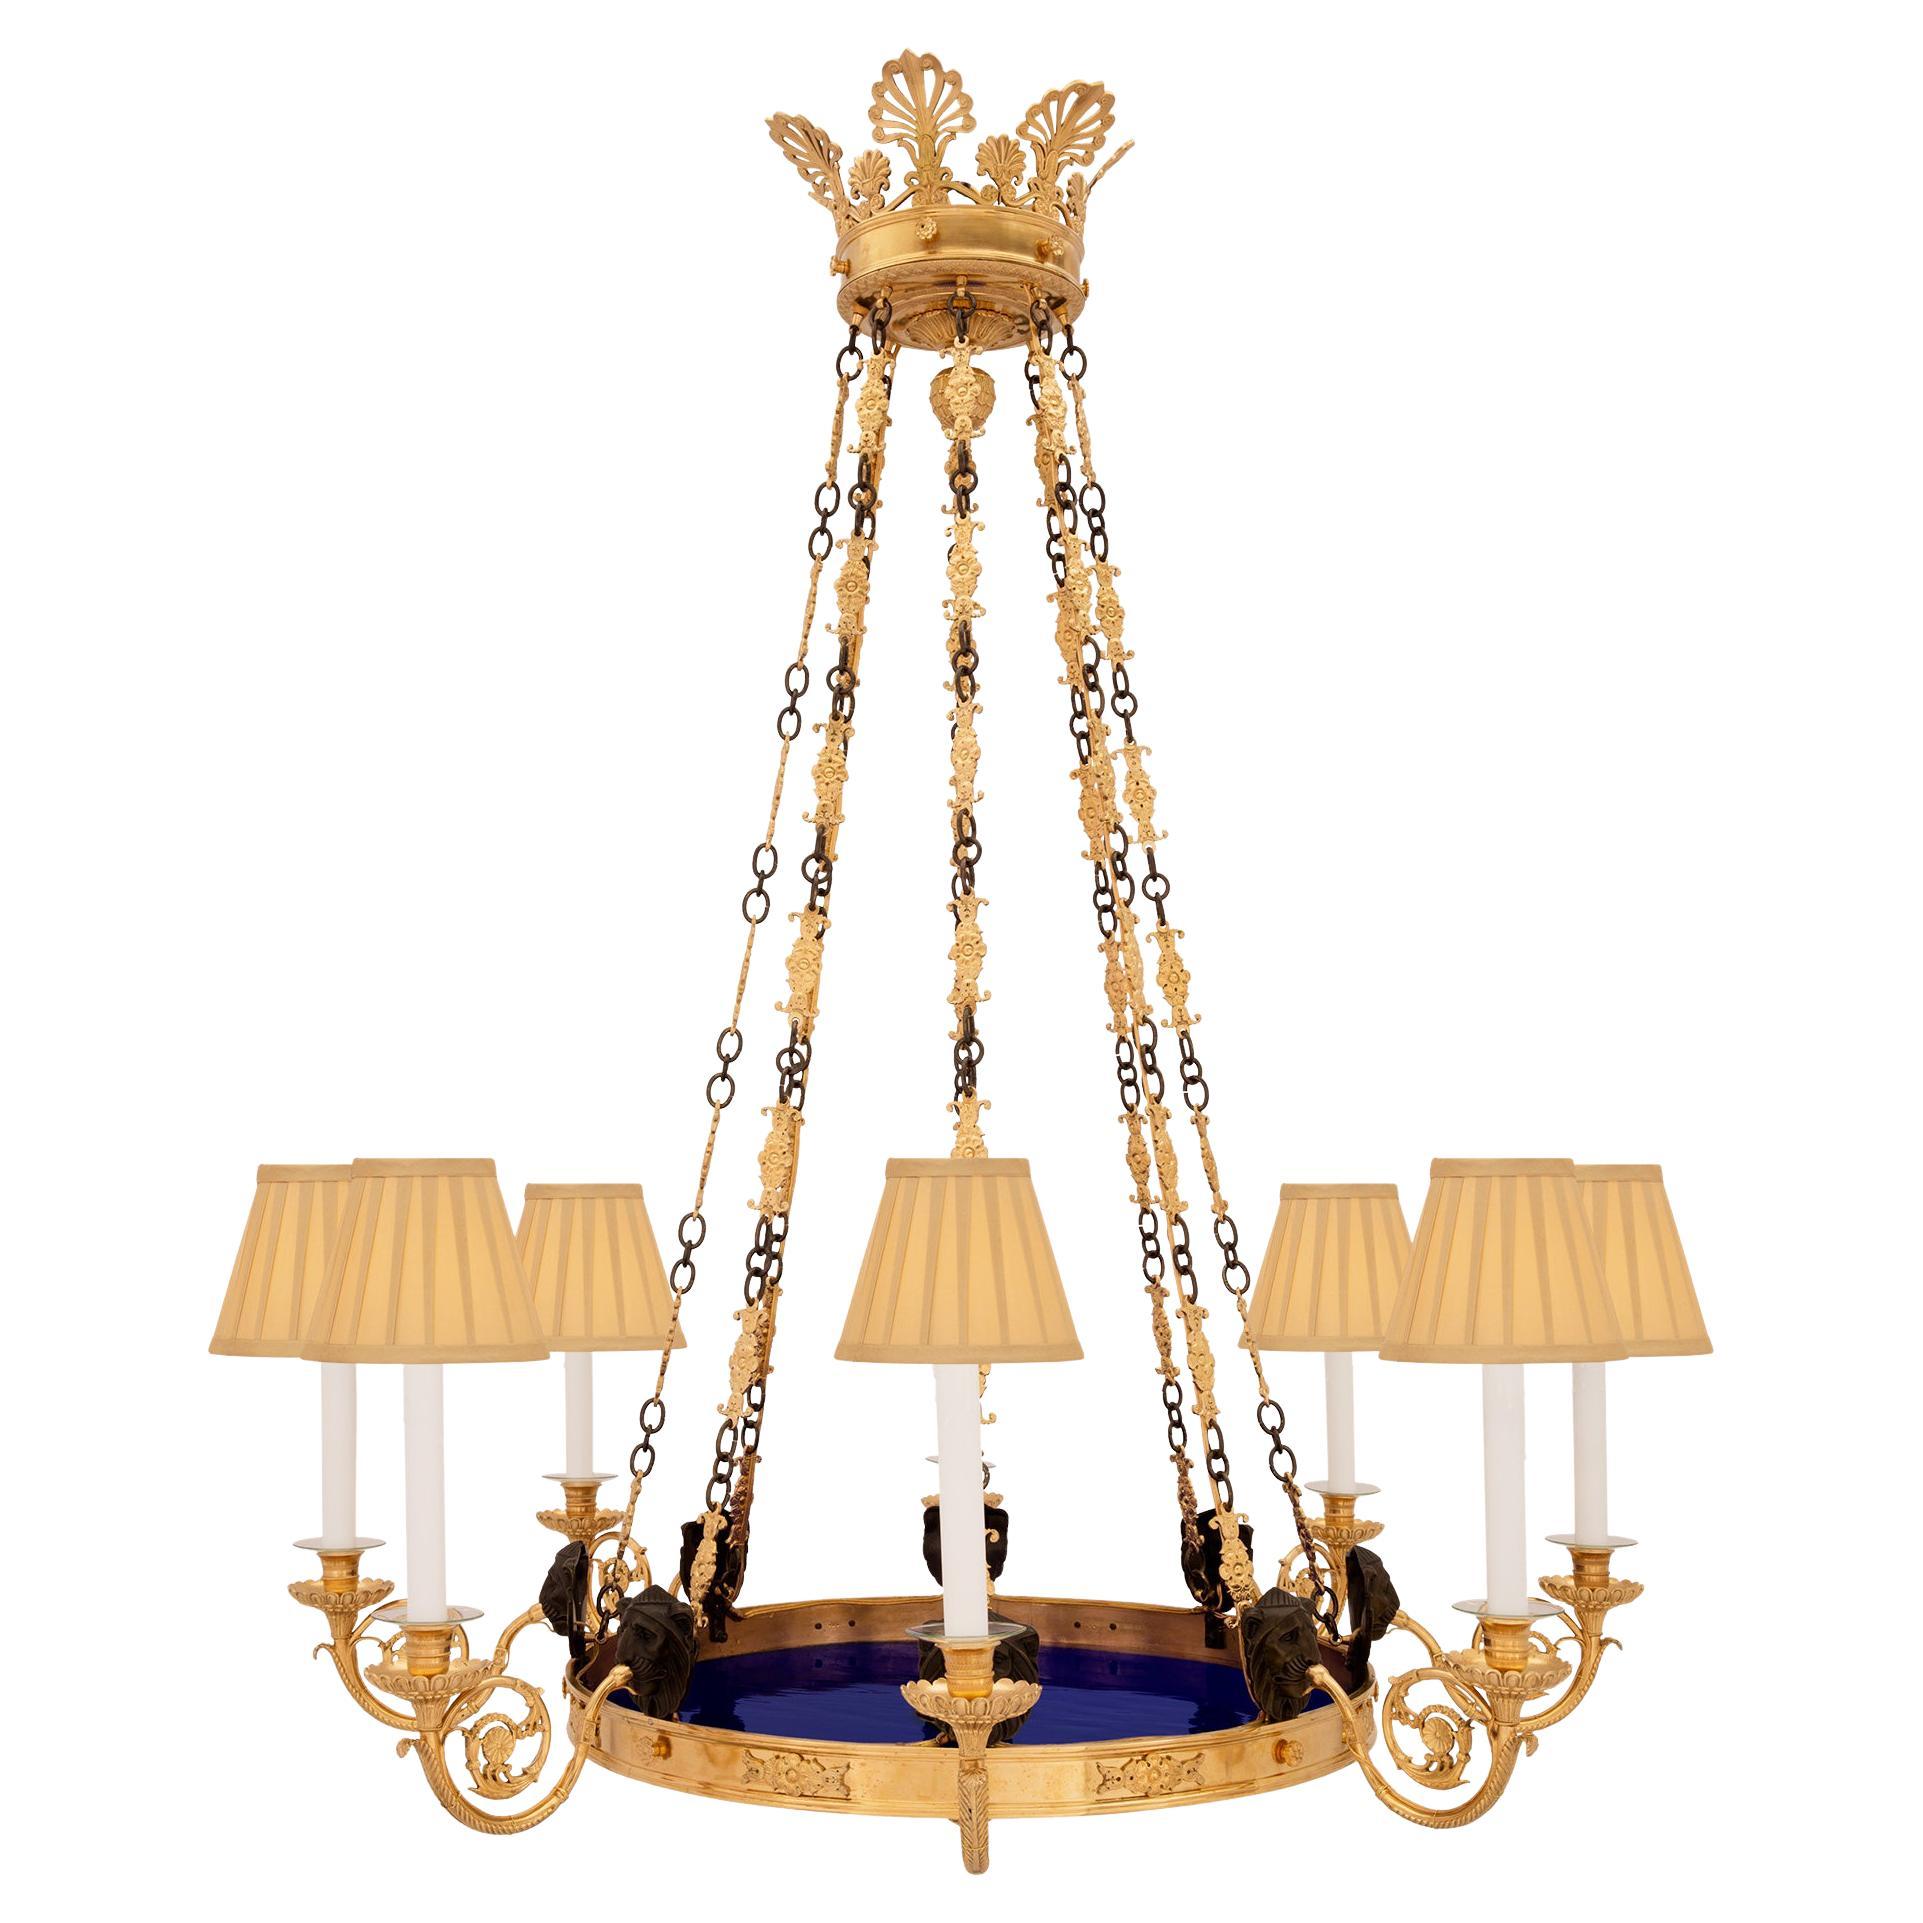 Russian 19th Century Neoclassical Style Bronze, Ormolu and Glass Chandelier For Sale